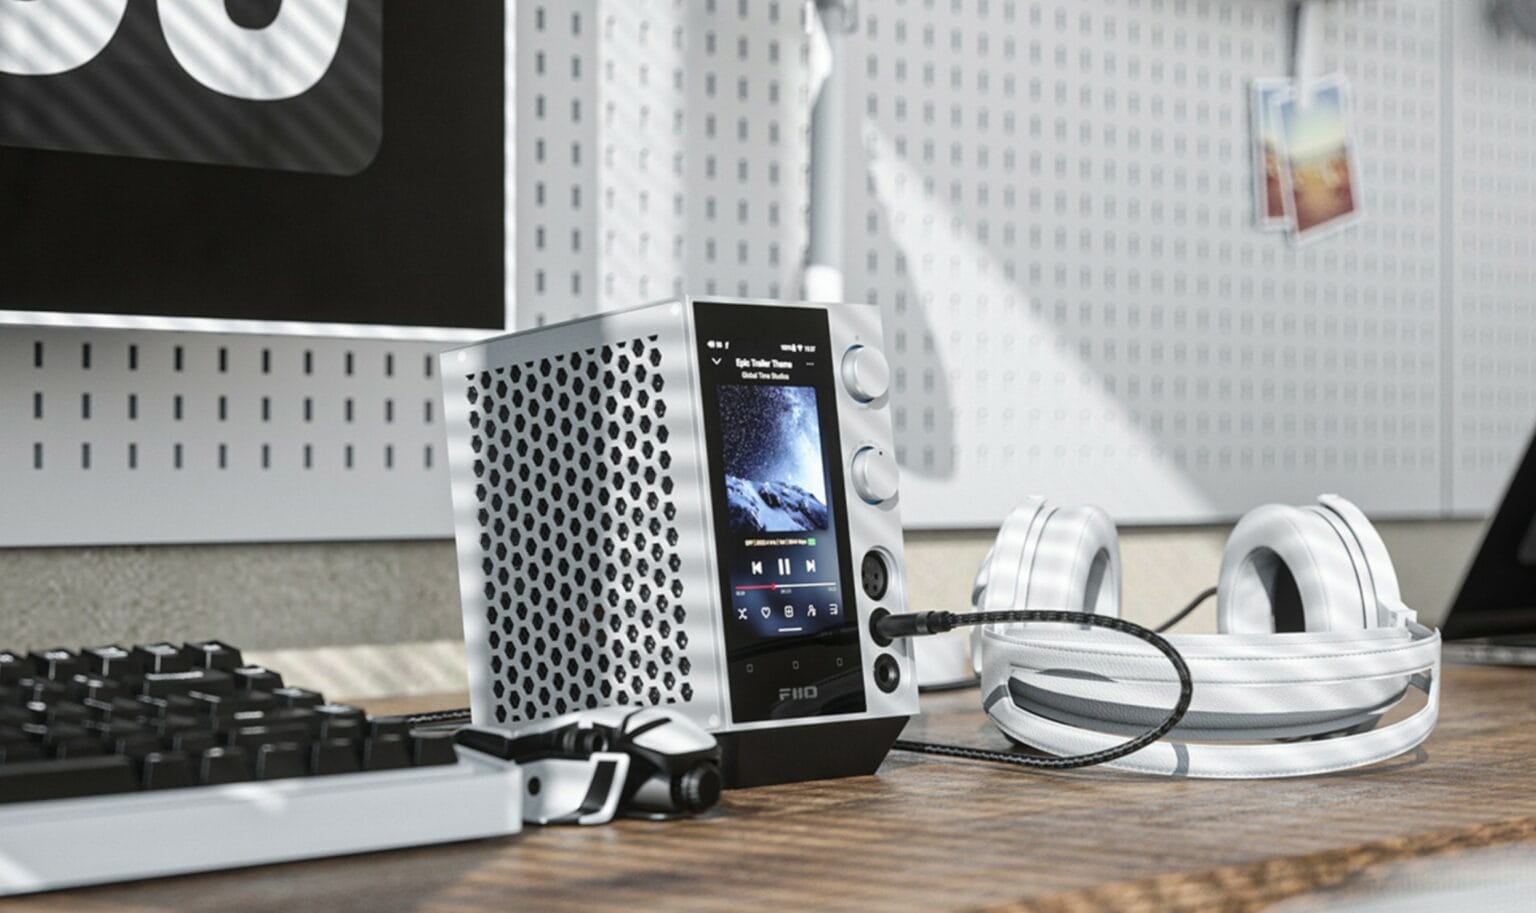 The FiiO R7 is designed to be the centerpiece of your desktop audio from all sources.